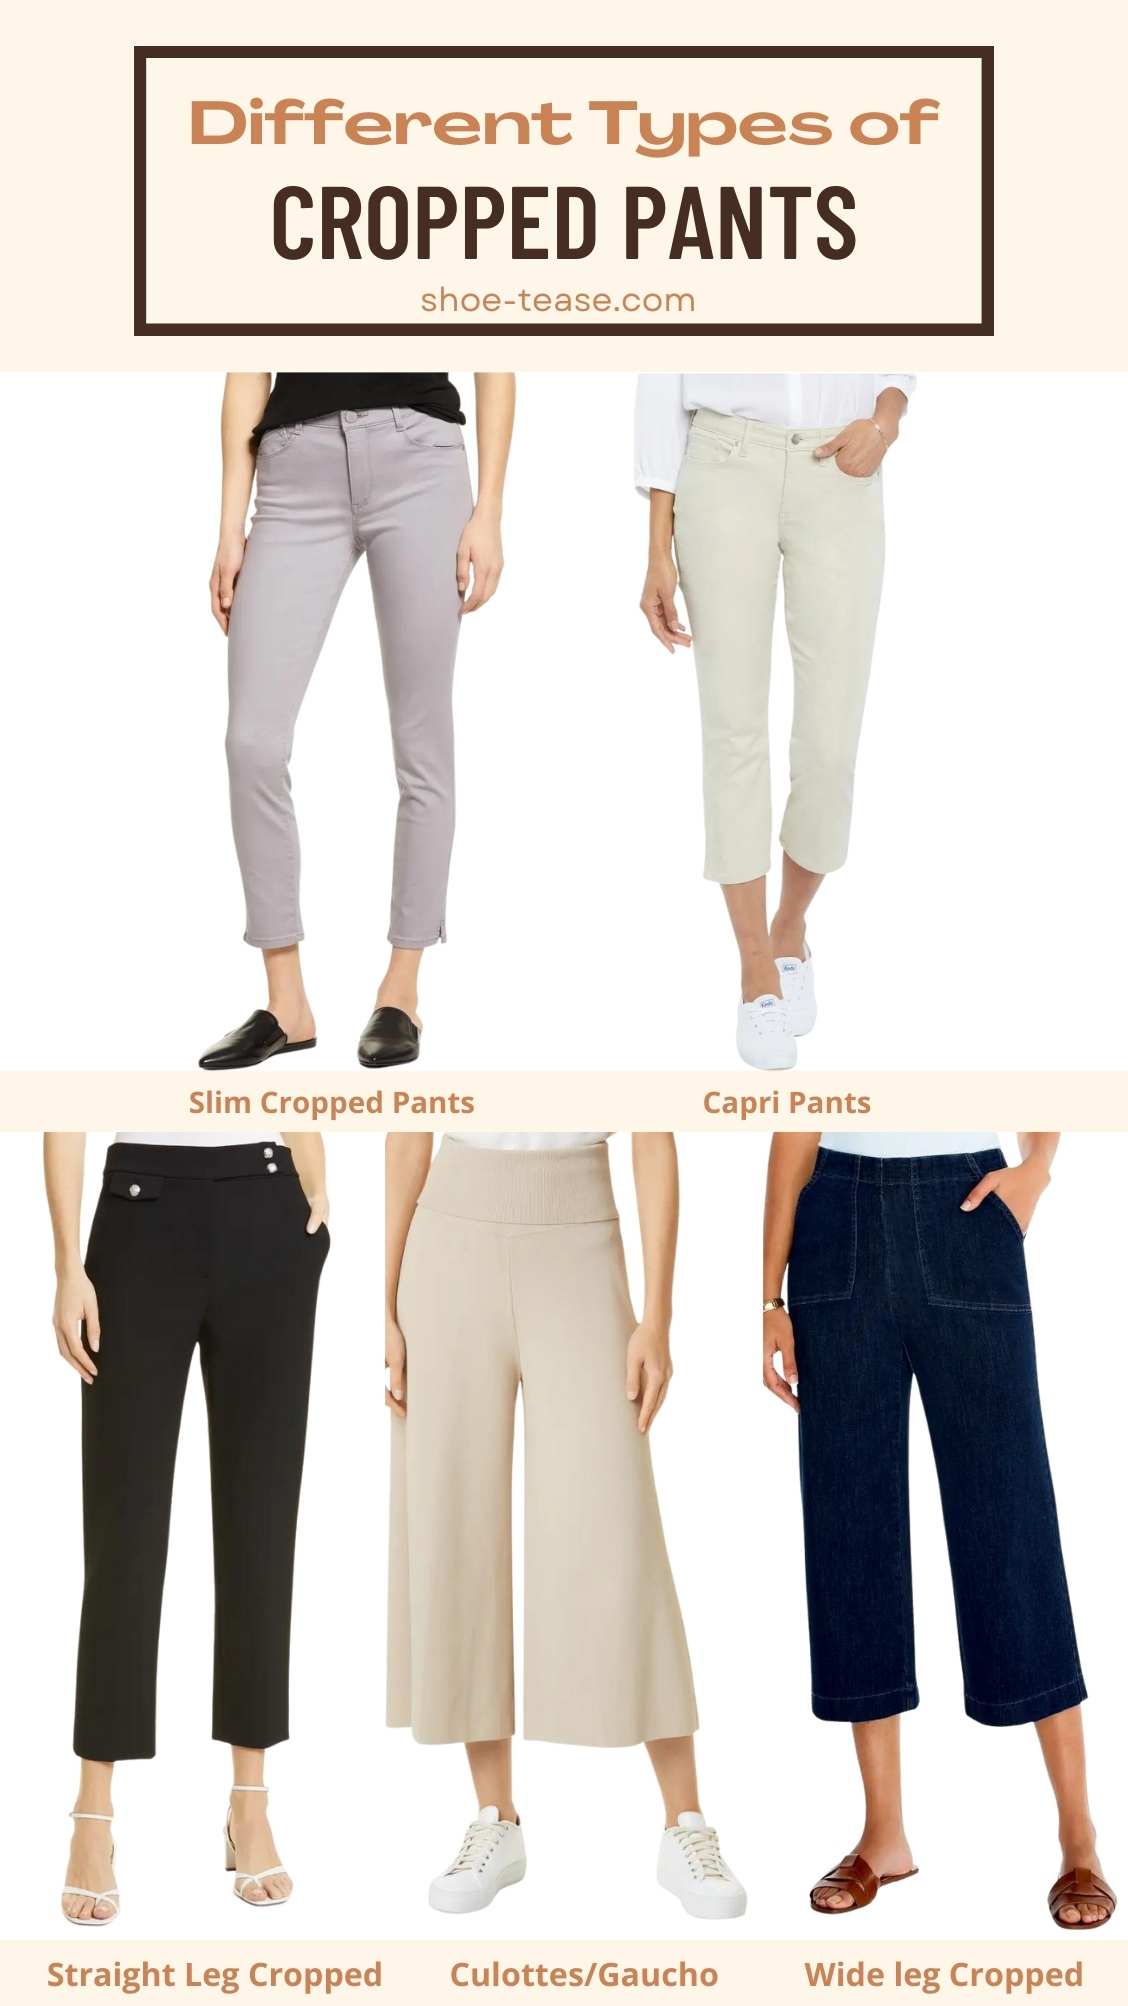 Capri Pants-In or Out of Style? - Cyndi Spivey